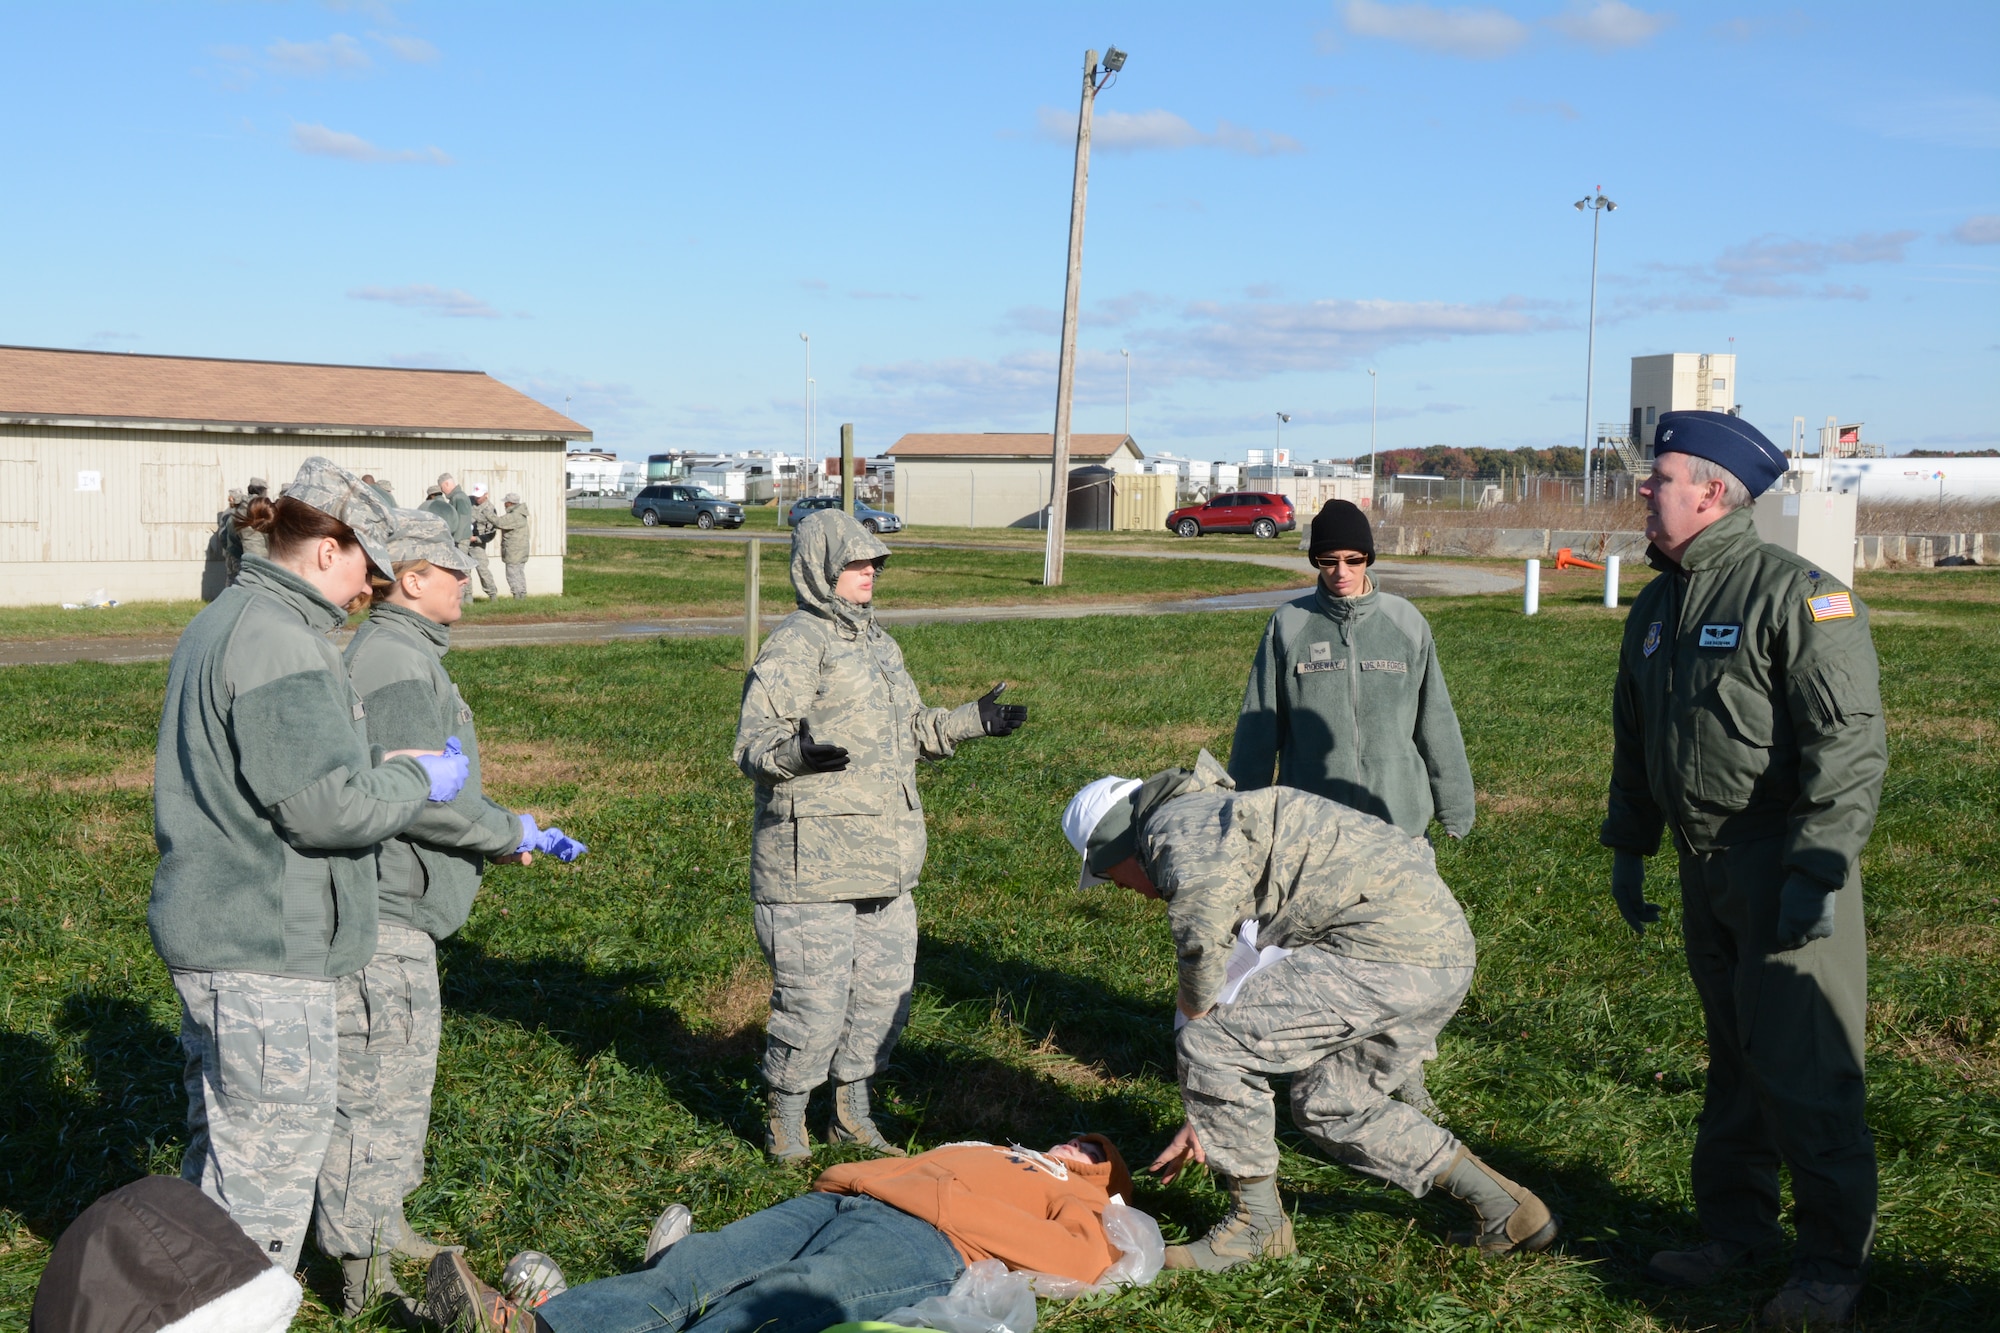 Reservists from the 512th Aerospace Medicine Squadron assess the simulated injuries of a Delaware Civil Air Patrol cadet during a mass casualty training exercise Nov. 2, 2014, at Dover Air Force Base, Del. The cadets exhibited simulated injuries including severe head trauma, dismembered limbs and open bone fractures. (U.S. Air Force photo/Senior Airman Joe Yanik)  